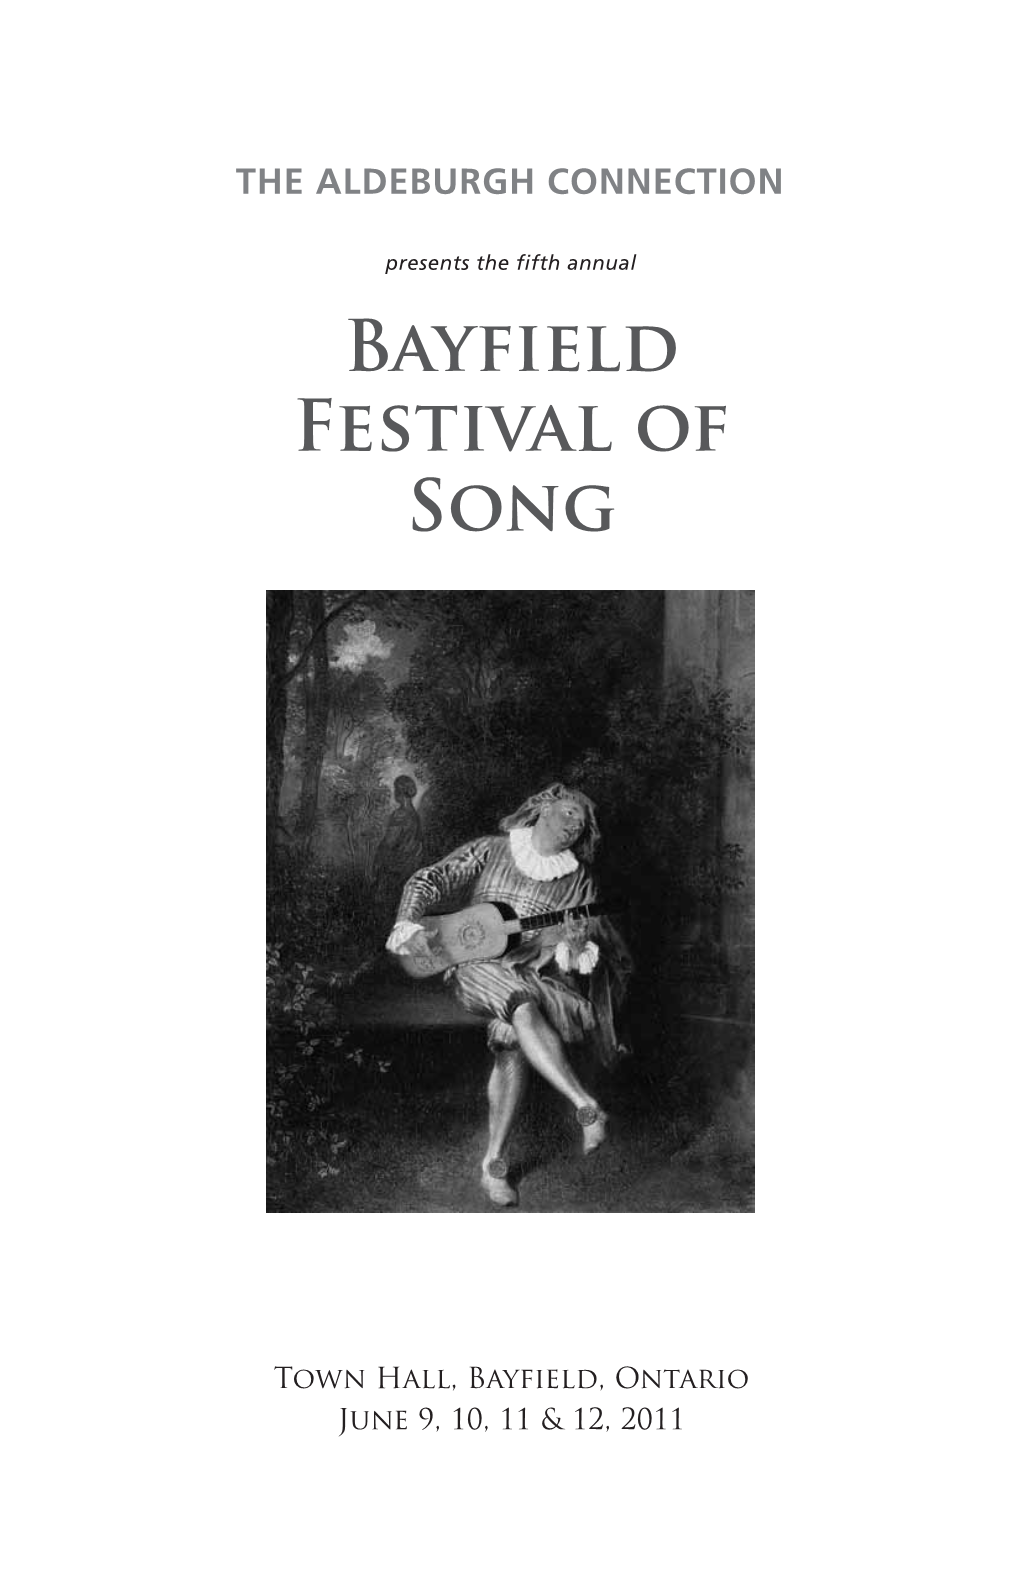 Bayfield Festival of Song